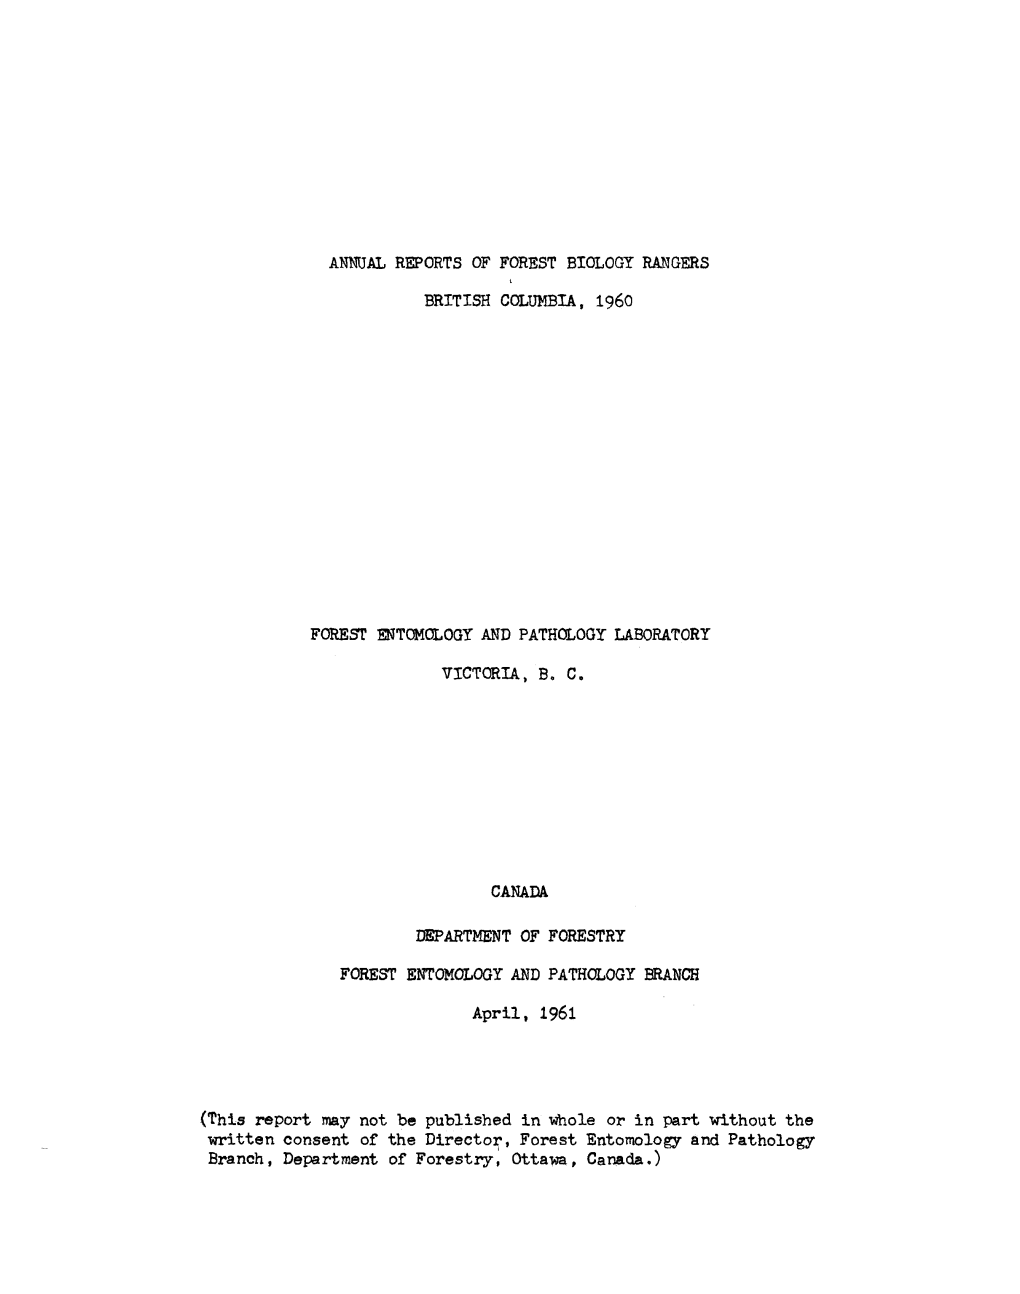 Annual Reports of Forest Biology Rangers British Columbia, 1960